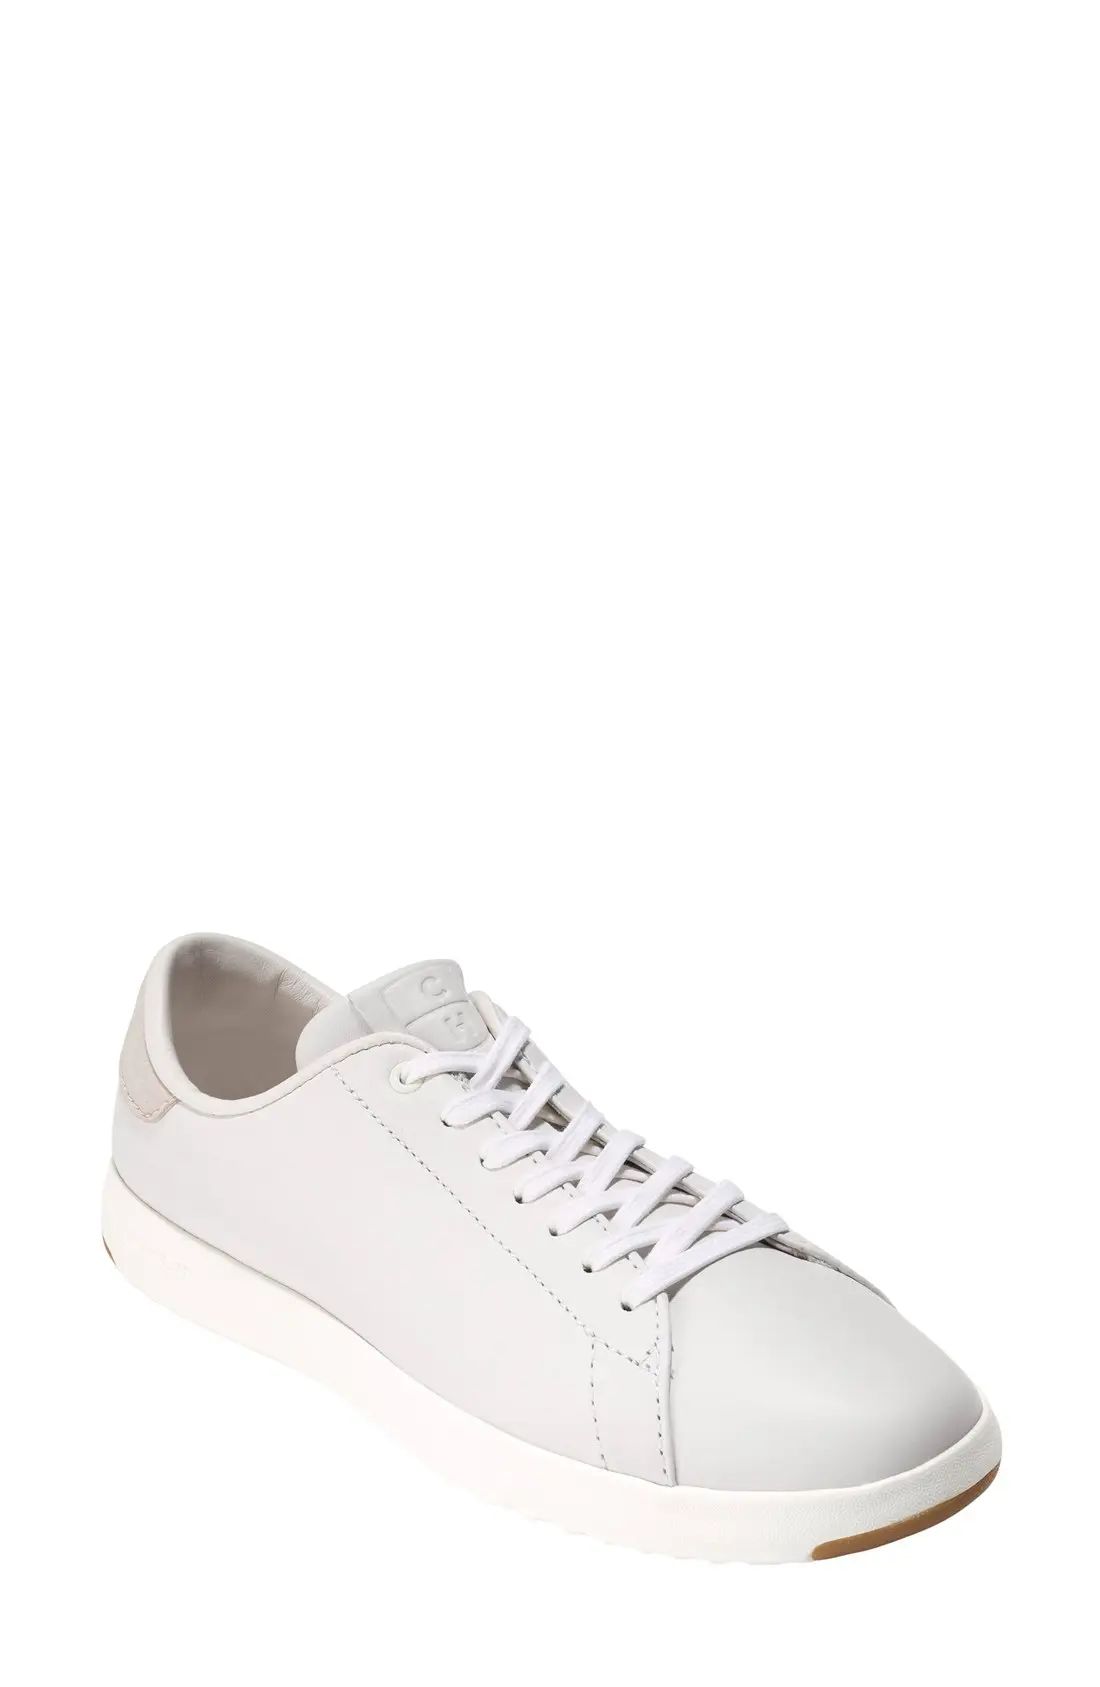 Cole Haan GrandPro Tennis Shoe in Optic White Leather at Nordstrom, Size 9 | Nordstrom